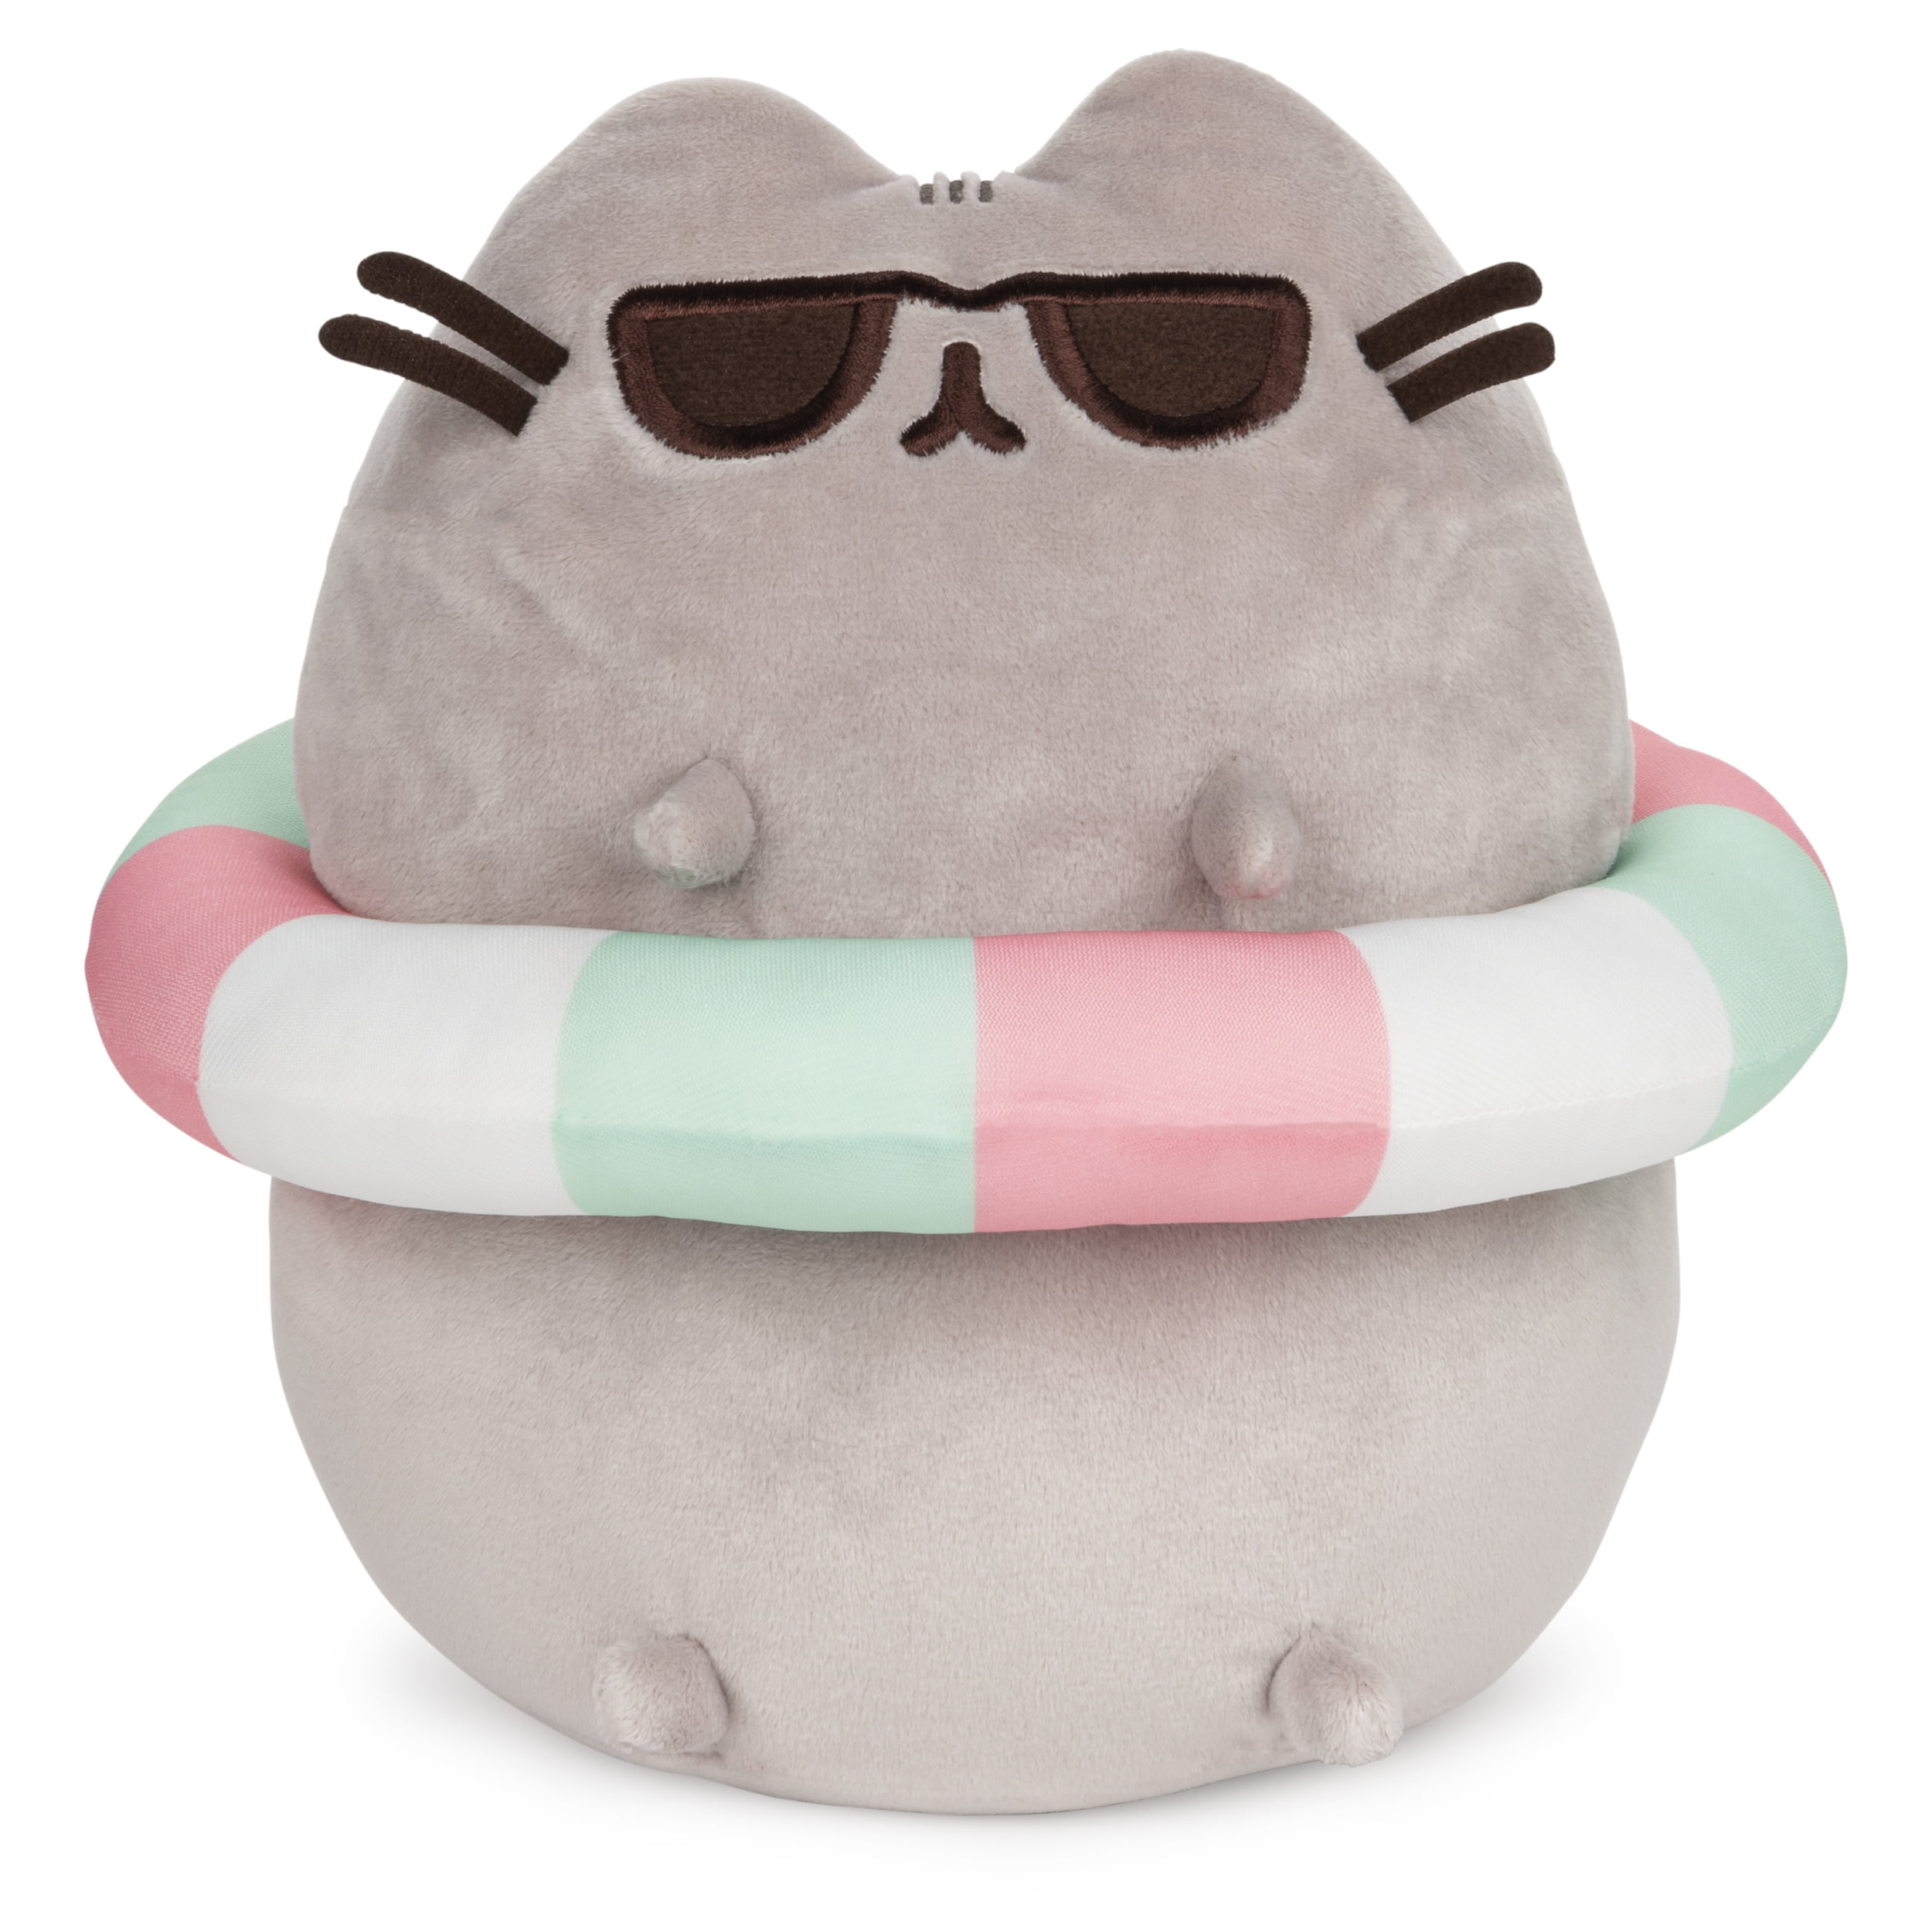 GUND Pusheen With Sloth Plush Stuffed Animal Set of 2 Multicolor 13" for sale online 